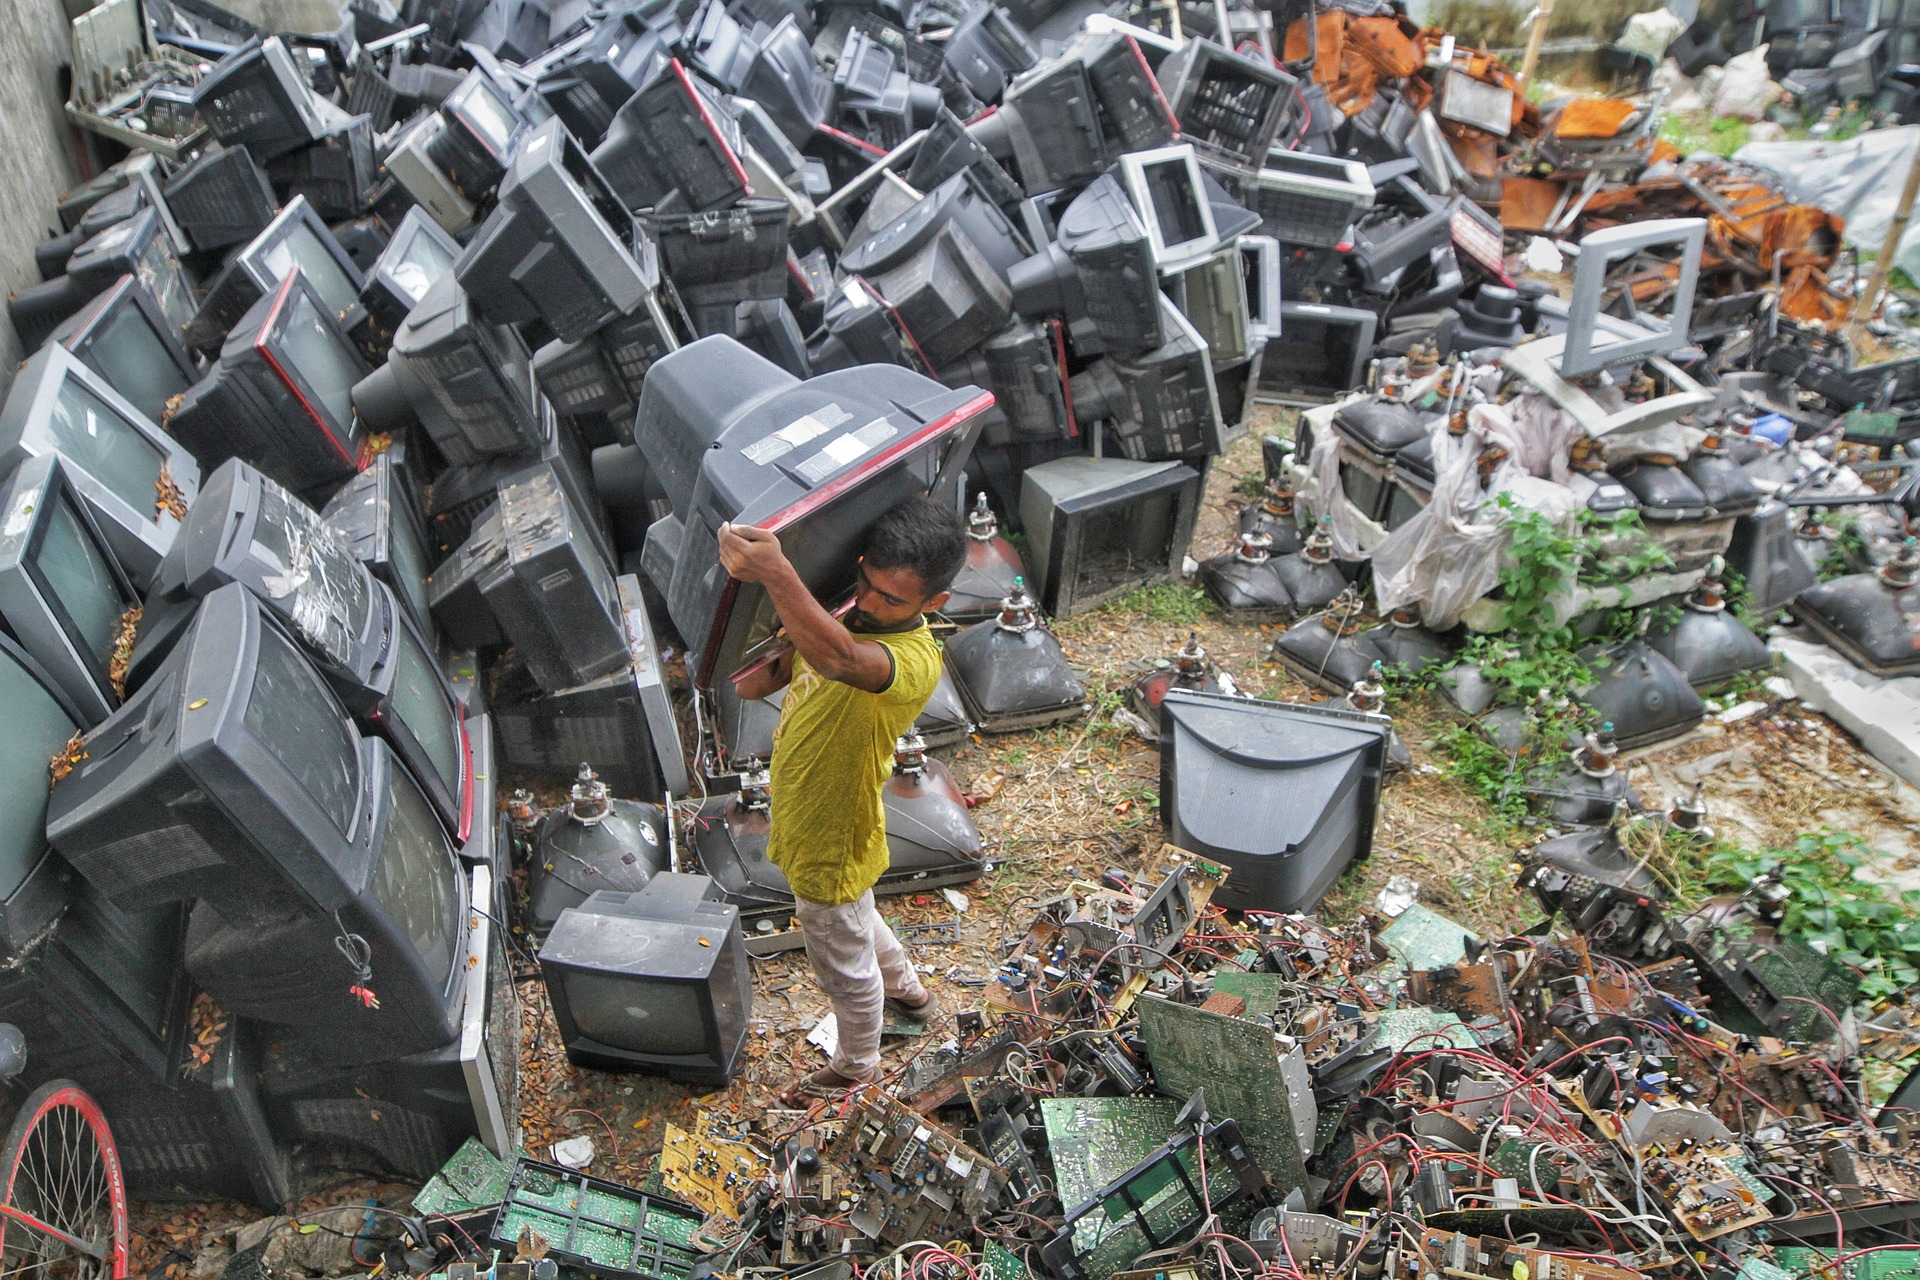 Recycle your electronics